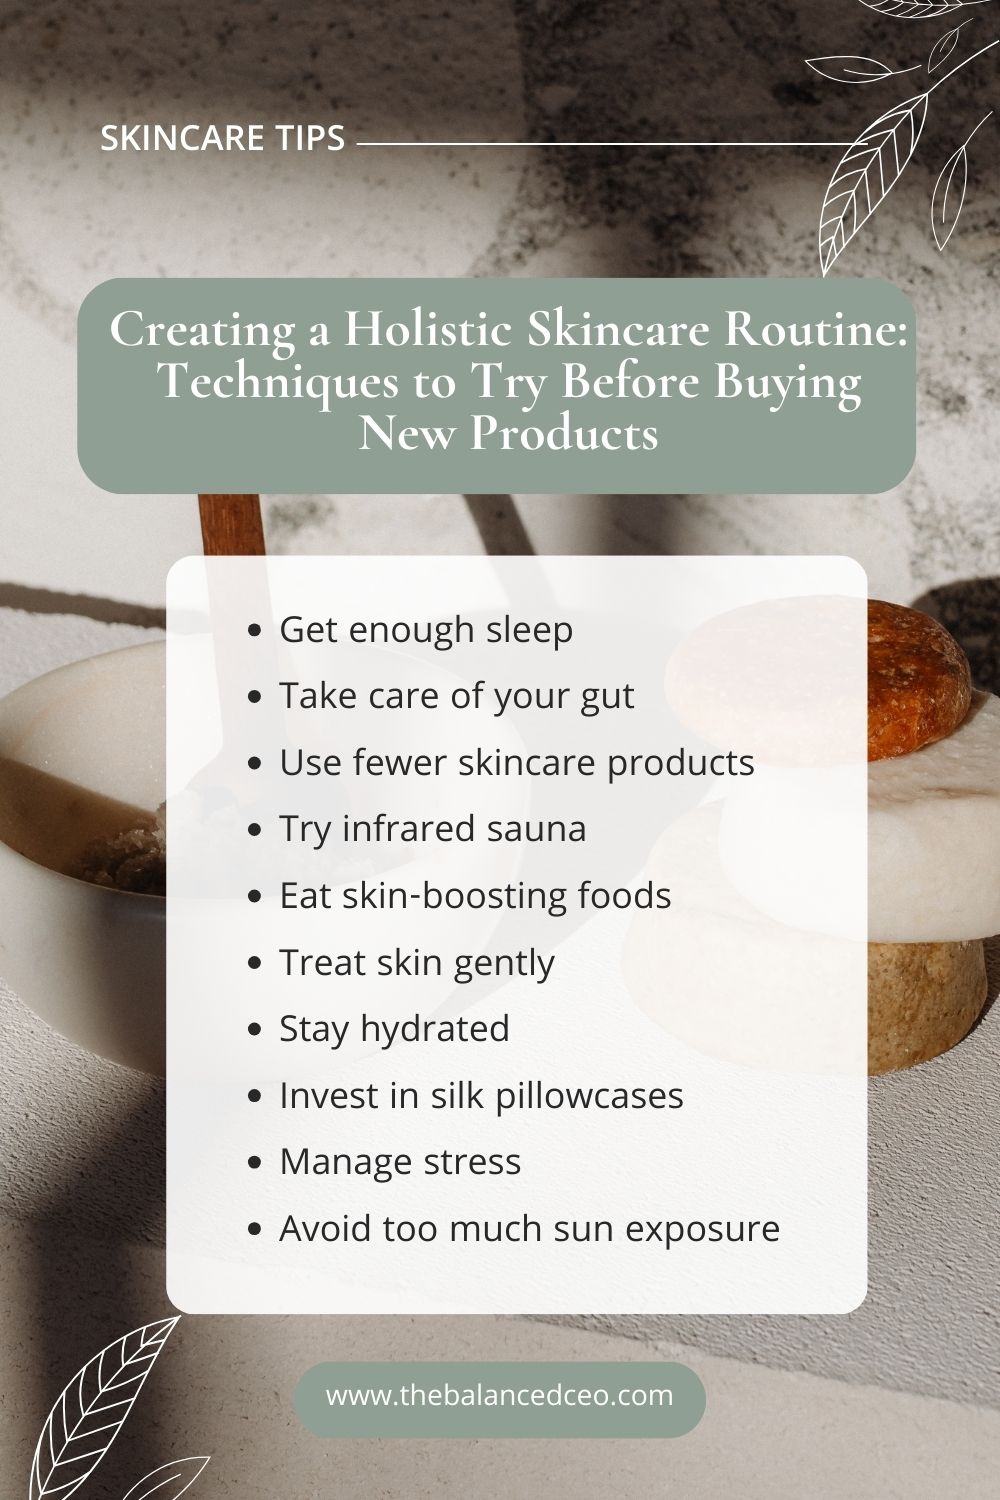 Creating a Holistic Skincare Routine: Techniques to Try Before Buying New Products